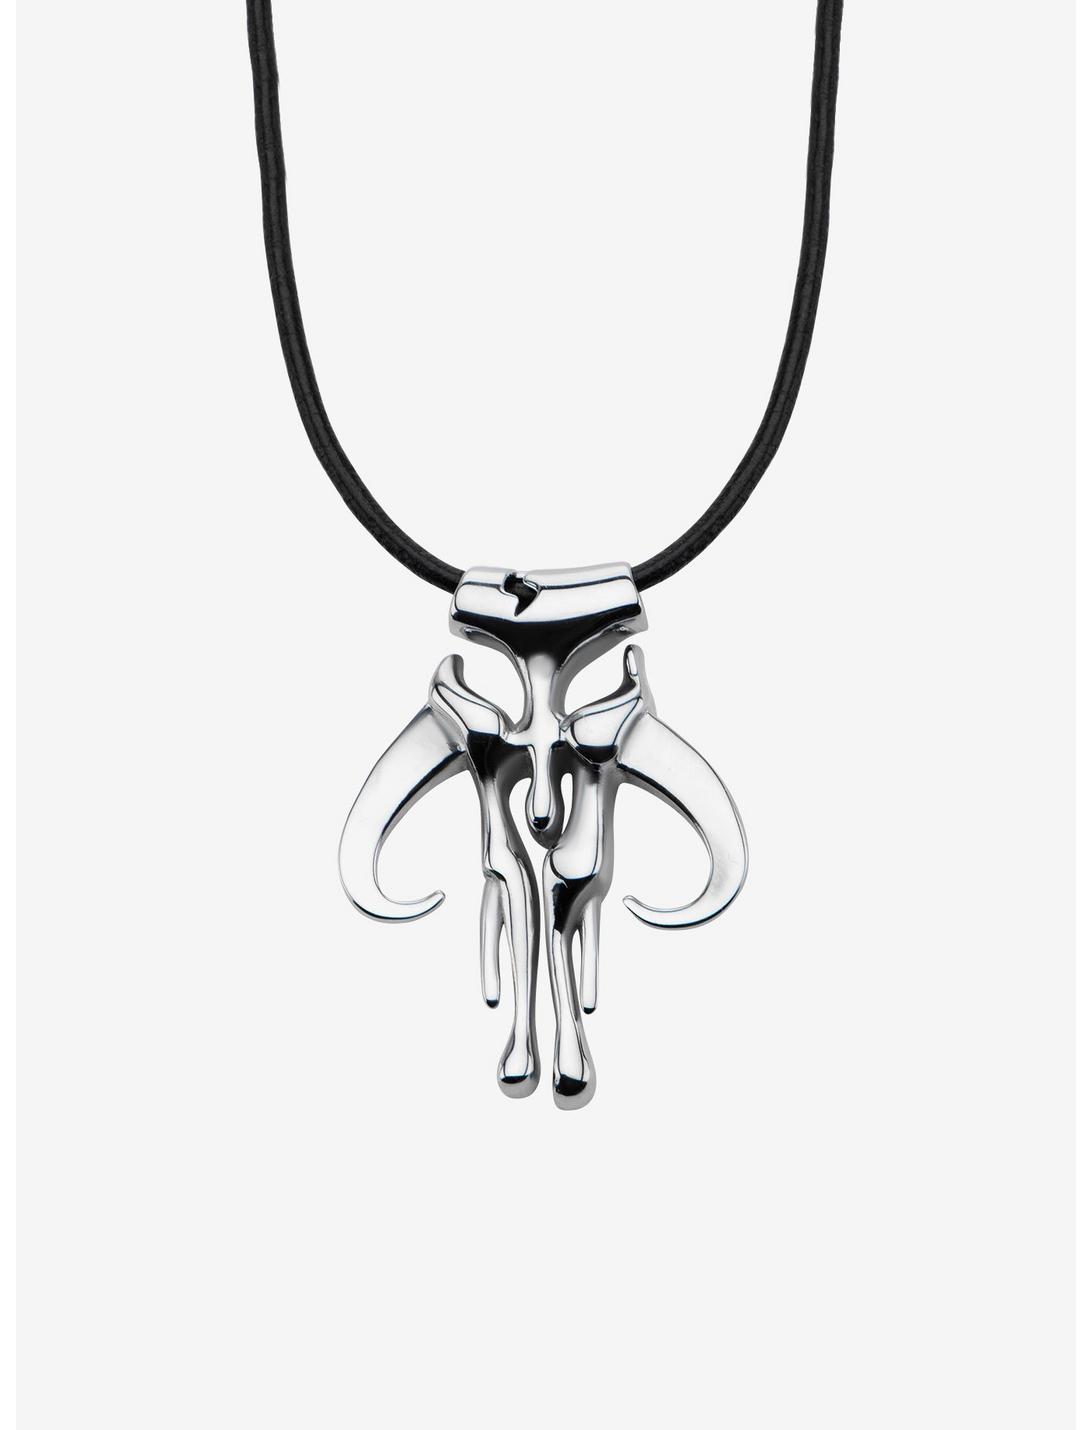 Star Wars Mandalorian Symbol Pendant With Leather Cord Necklace, , hi-res